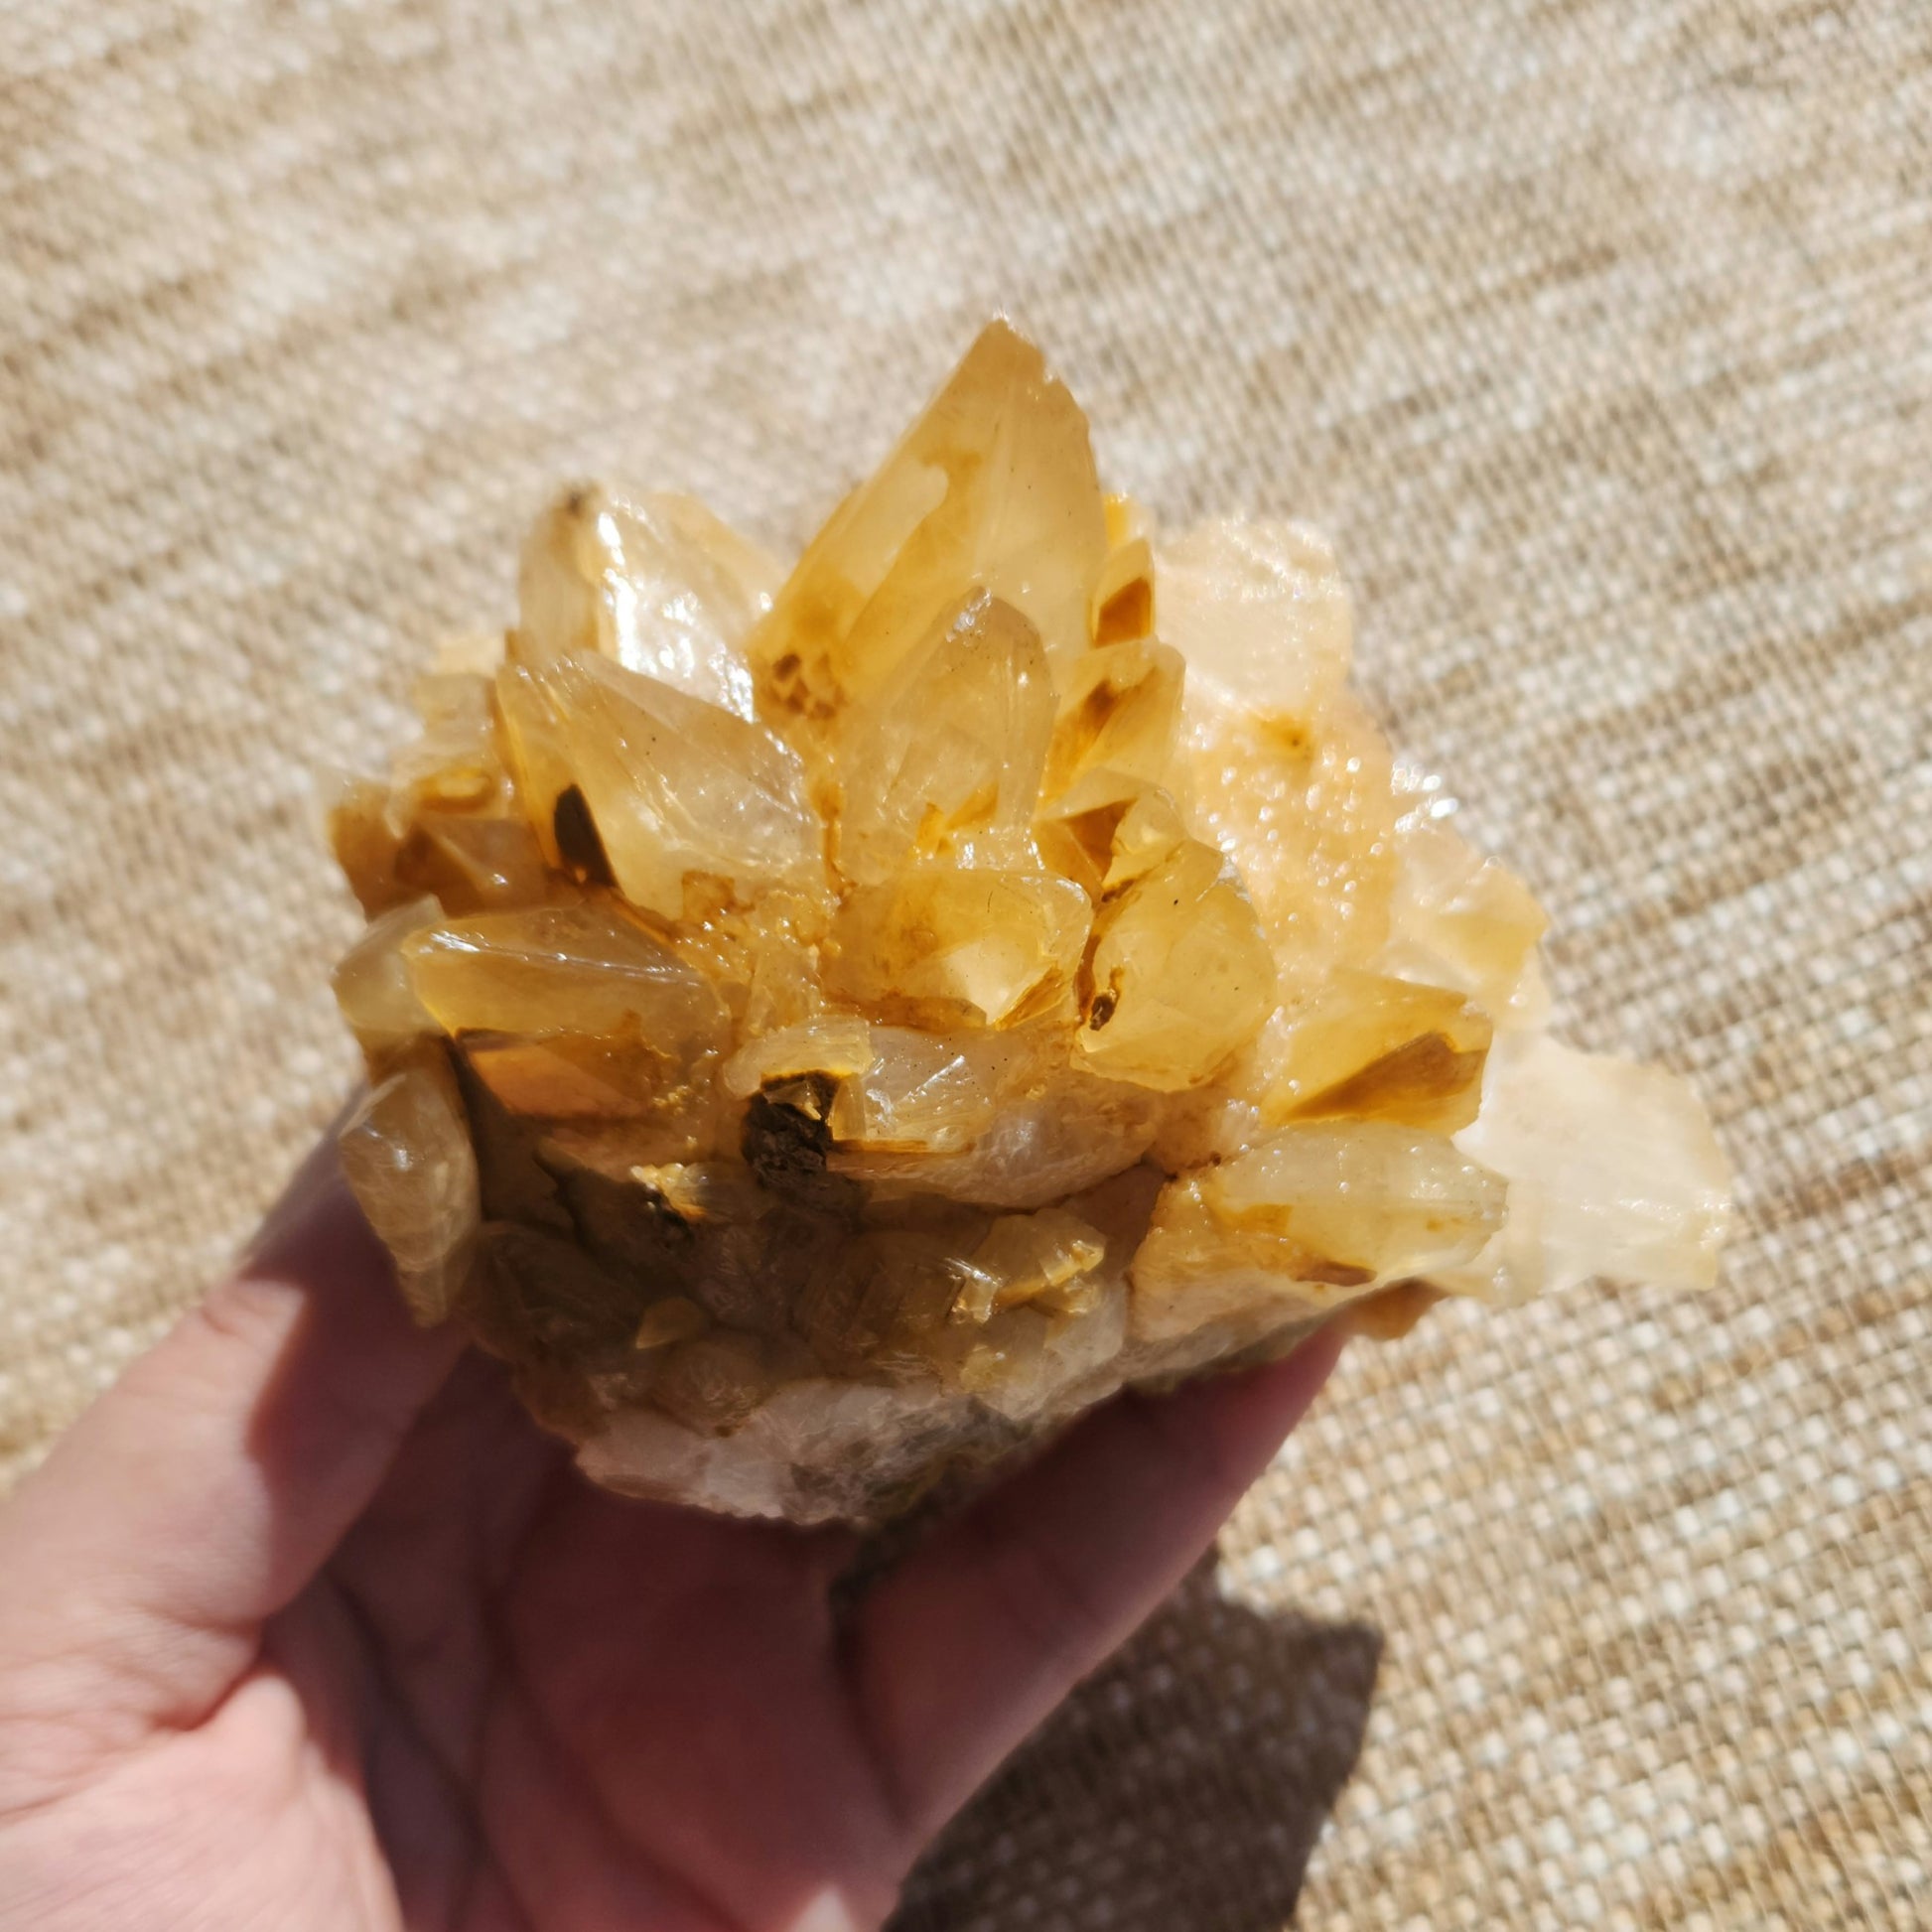 Dog Tooth Calcite Cluster 378g